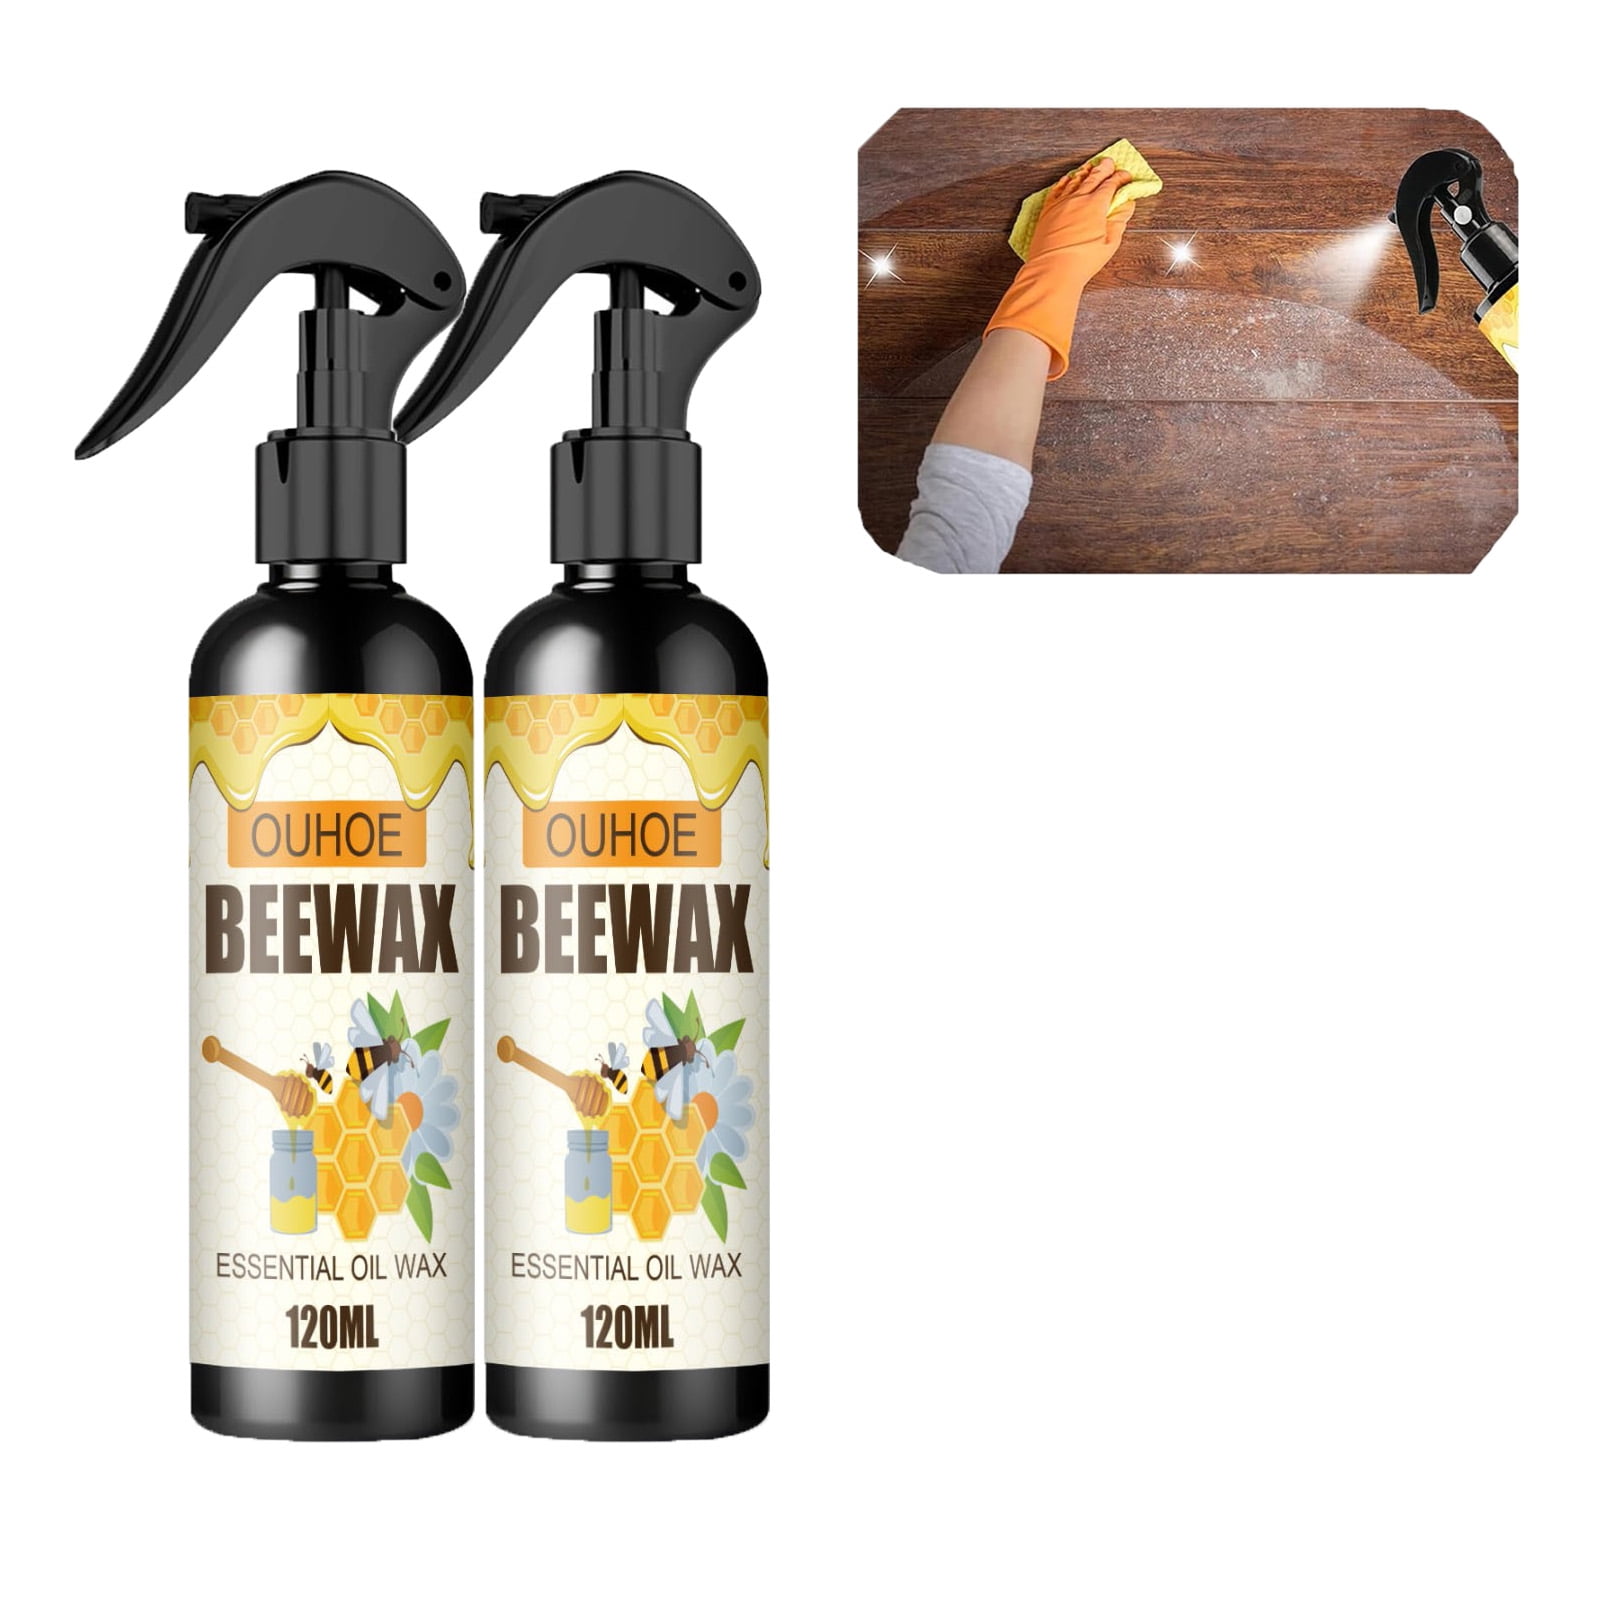 KCRPM Natural Micro-Molecularized Beeswax Spray, Molecularized Beeswax  Spray, Bees Wax Furniture Polish And Cleaner, Multipurpose Natural Beewax  Wood